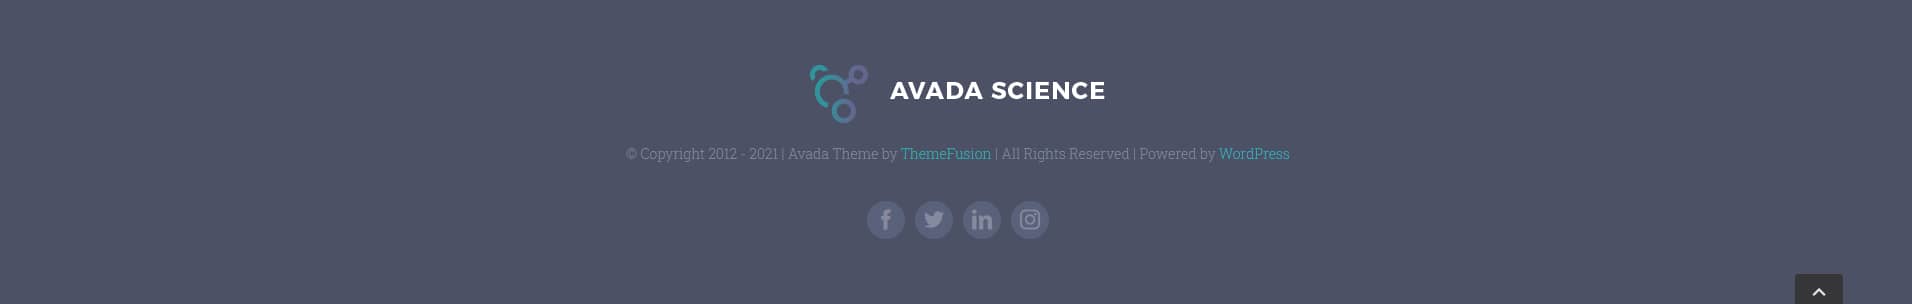 Avada Science Footer